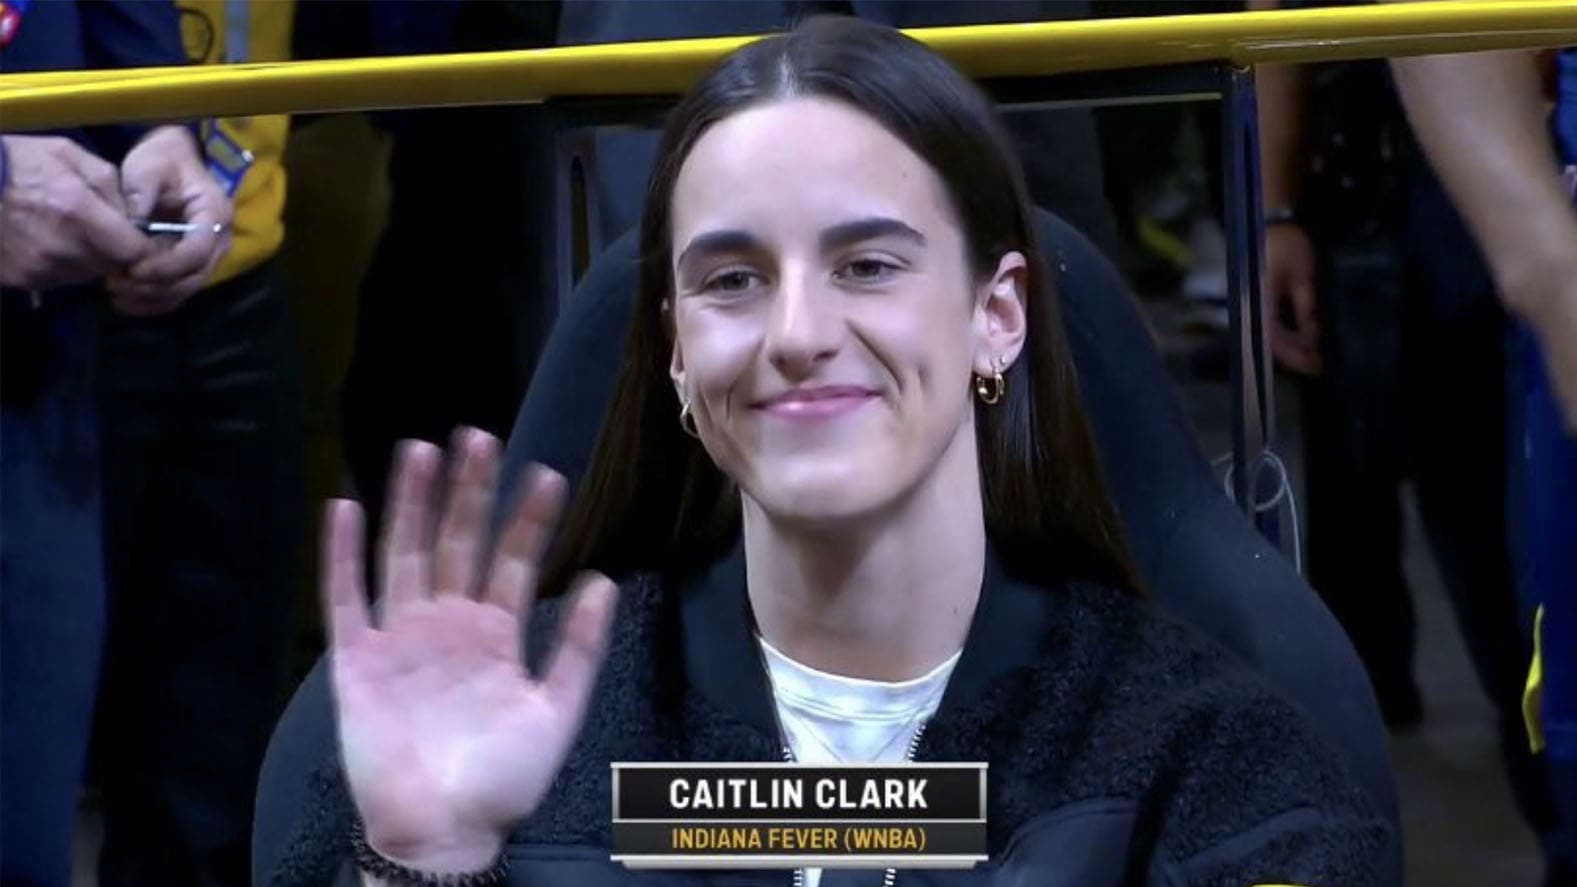 Caitlin Clark waves to the crowd